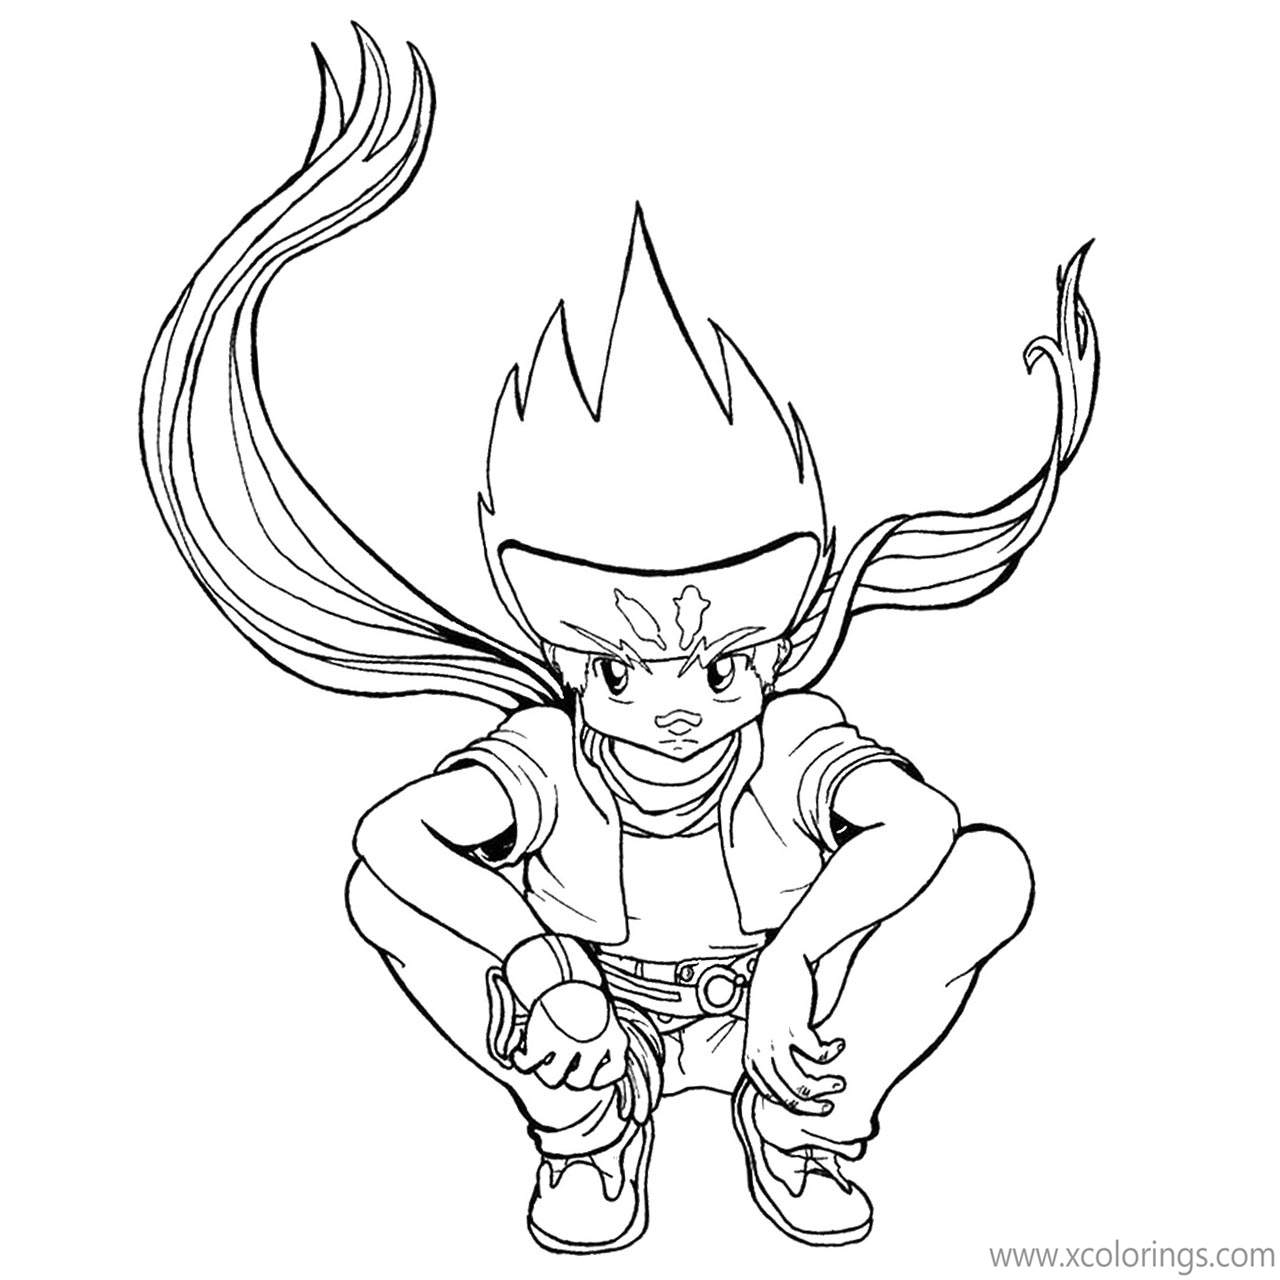 Free Beyblade Coloring Pages Gingka is Thinking About Something printable